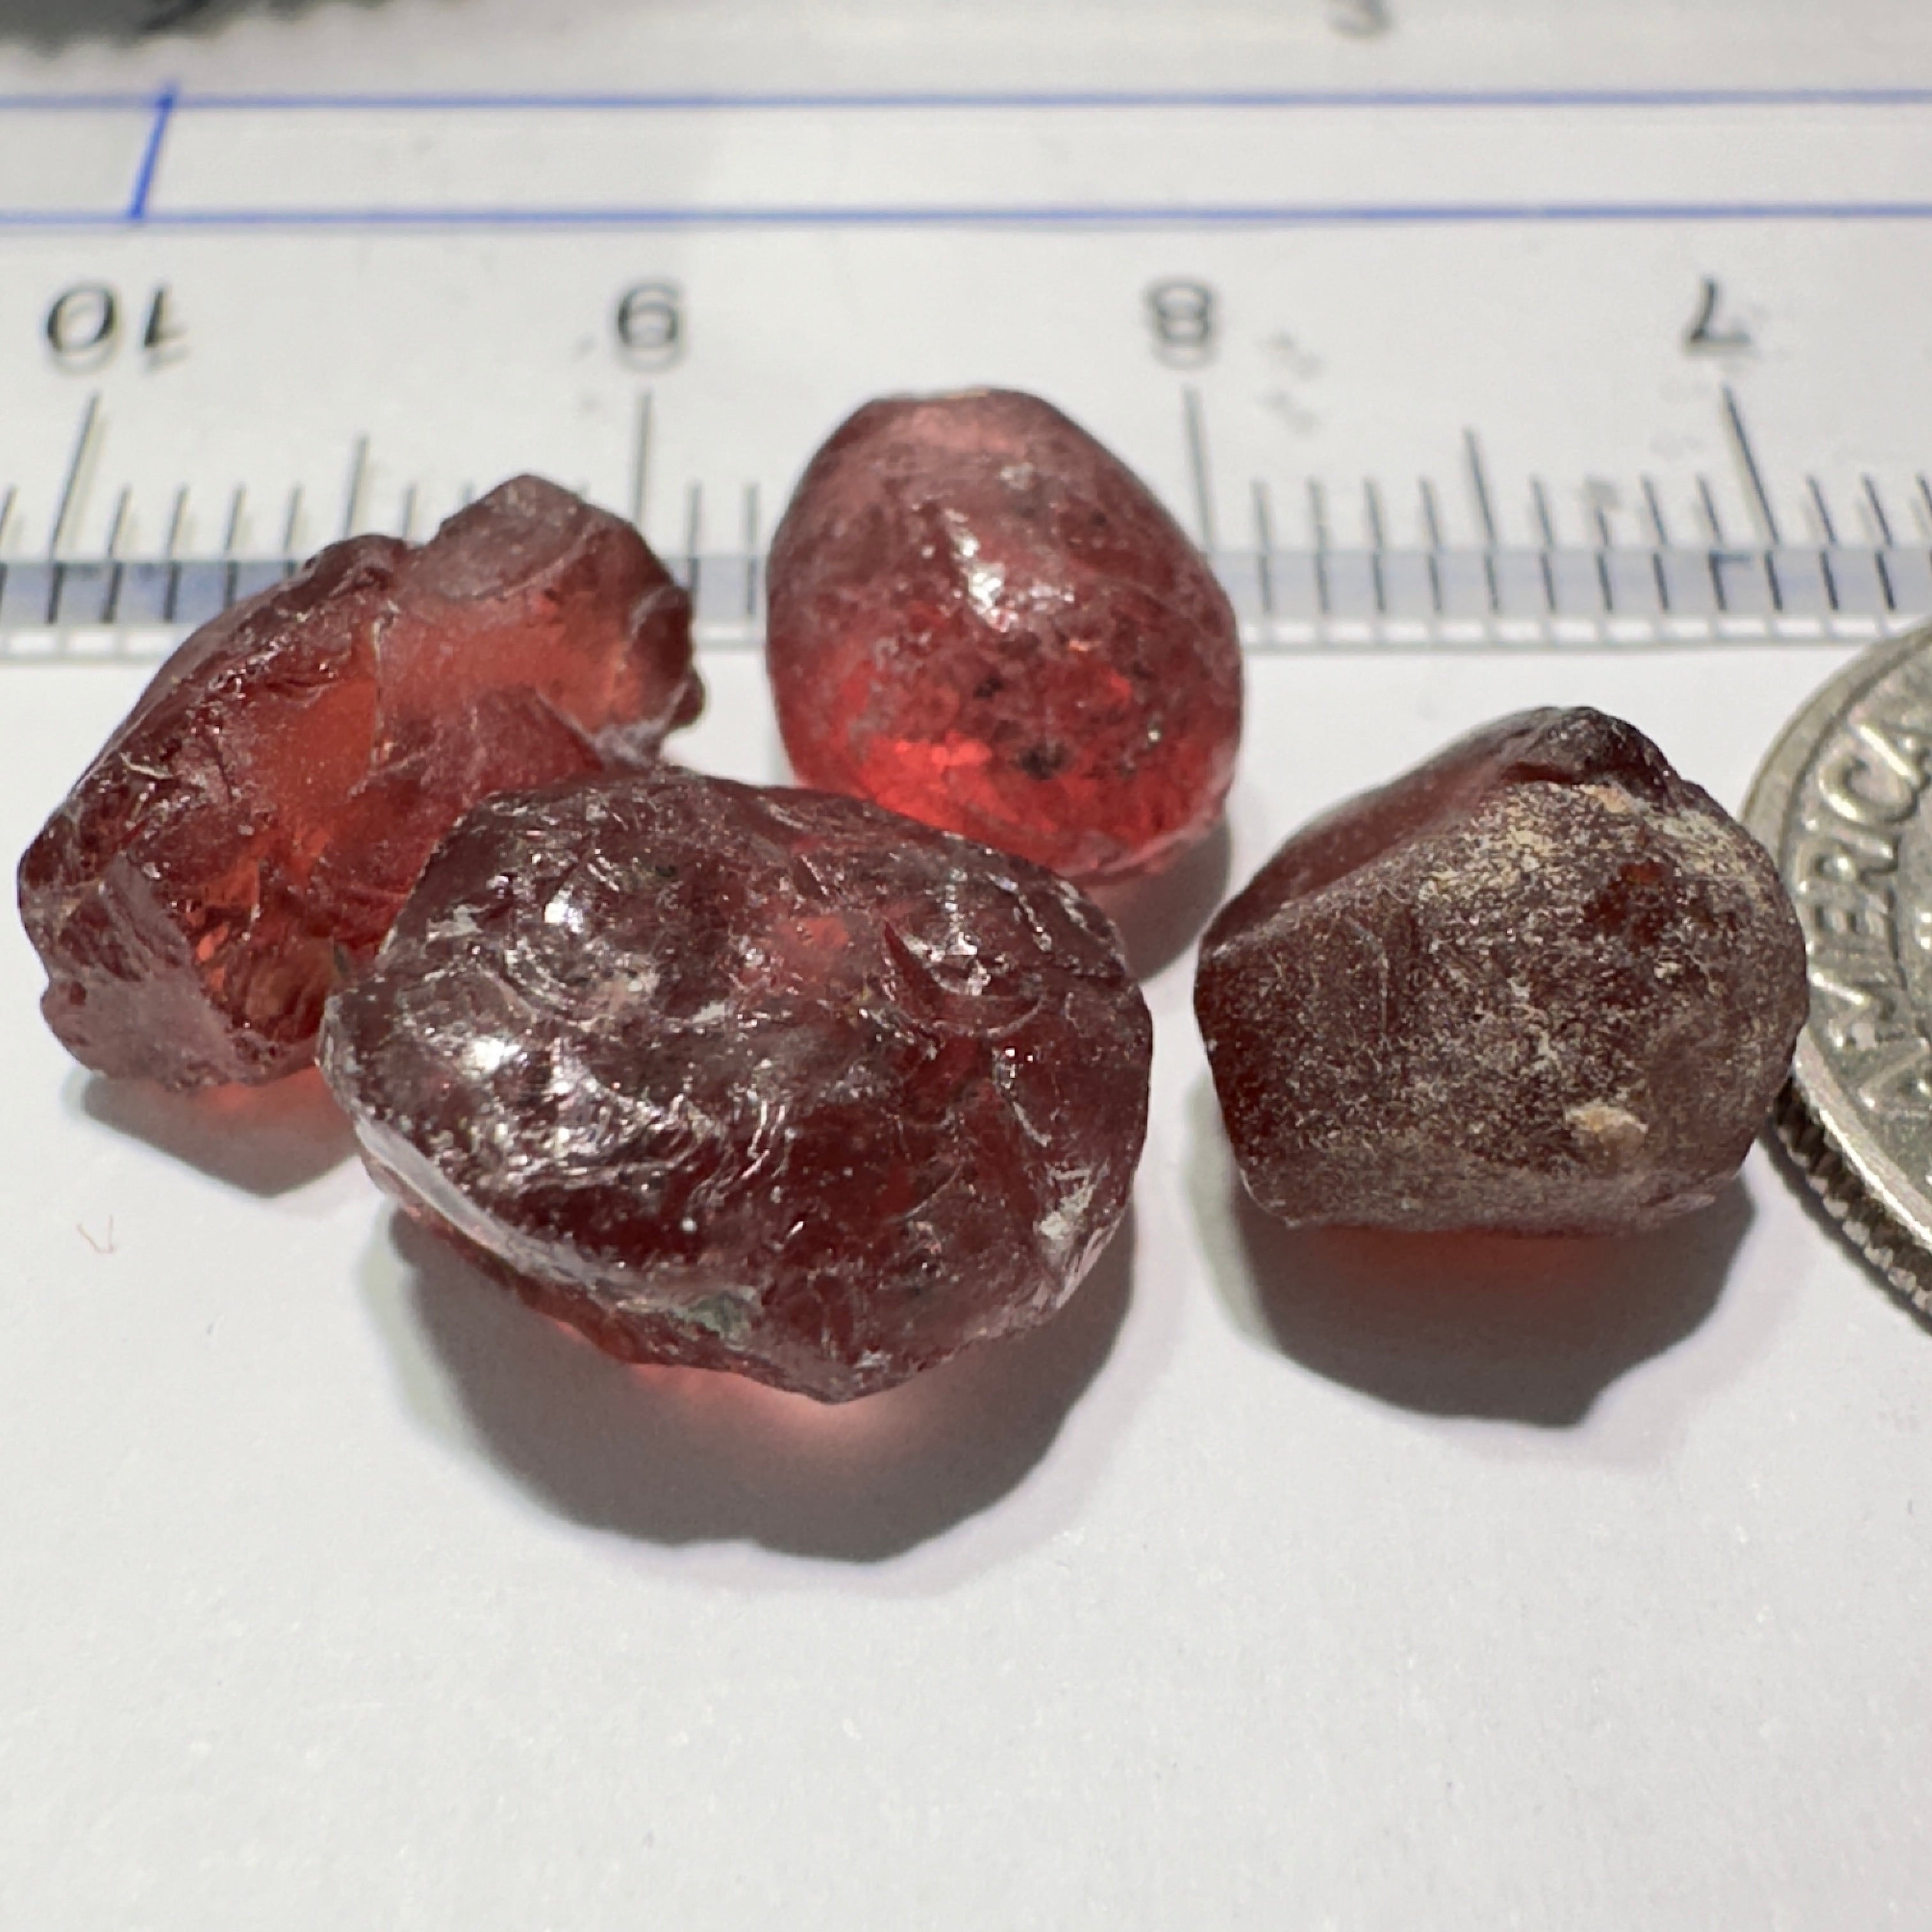 20.79ct Champagne Garnet Lot, Tanzania. 3.91ct-7.13ct. Included, Untreated Unheated